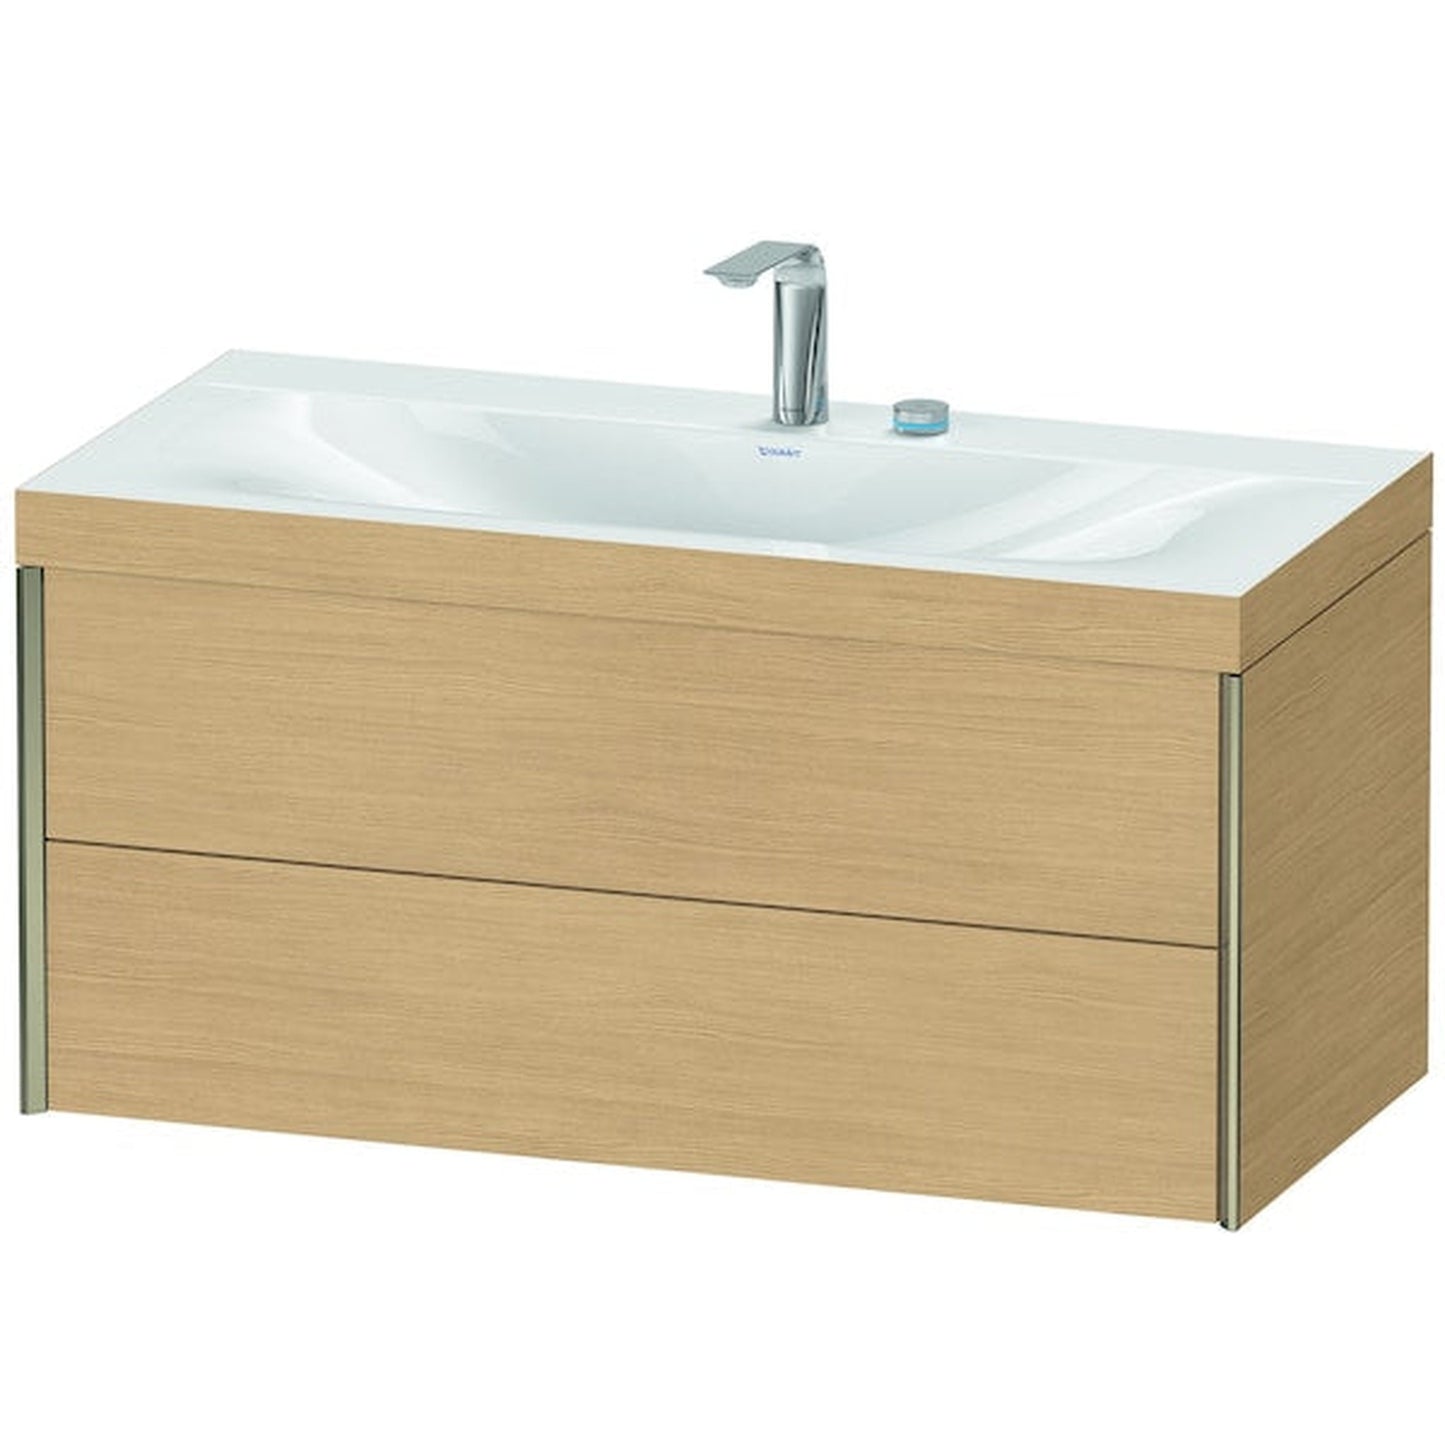 Duravit Xviu 39" x 20" x 19" Two Drawer C-Bonded Wall-Mount Vanity Kit With Two Tap Holes, Natural Oak (XV4616EB130C)